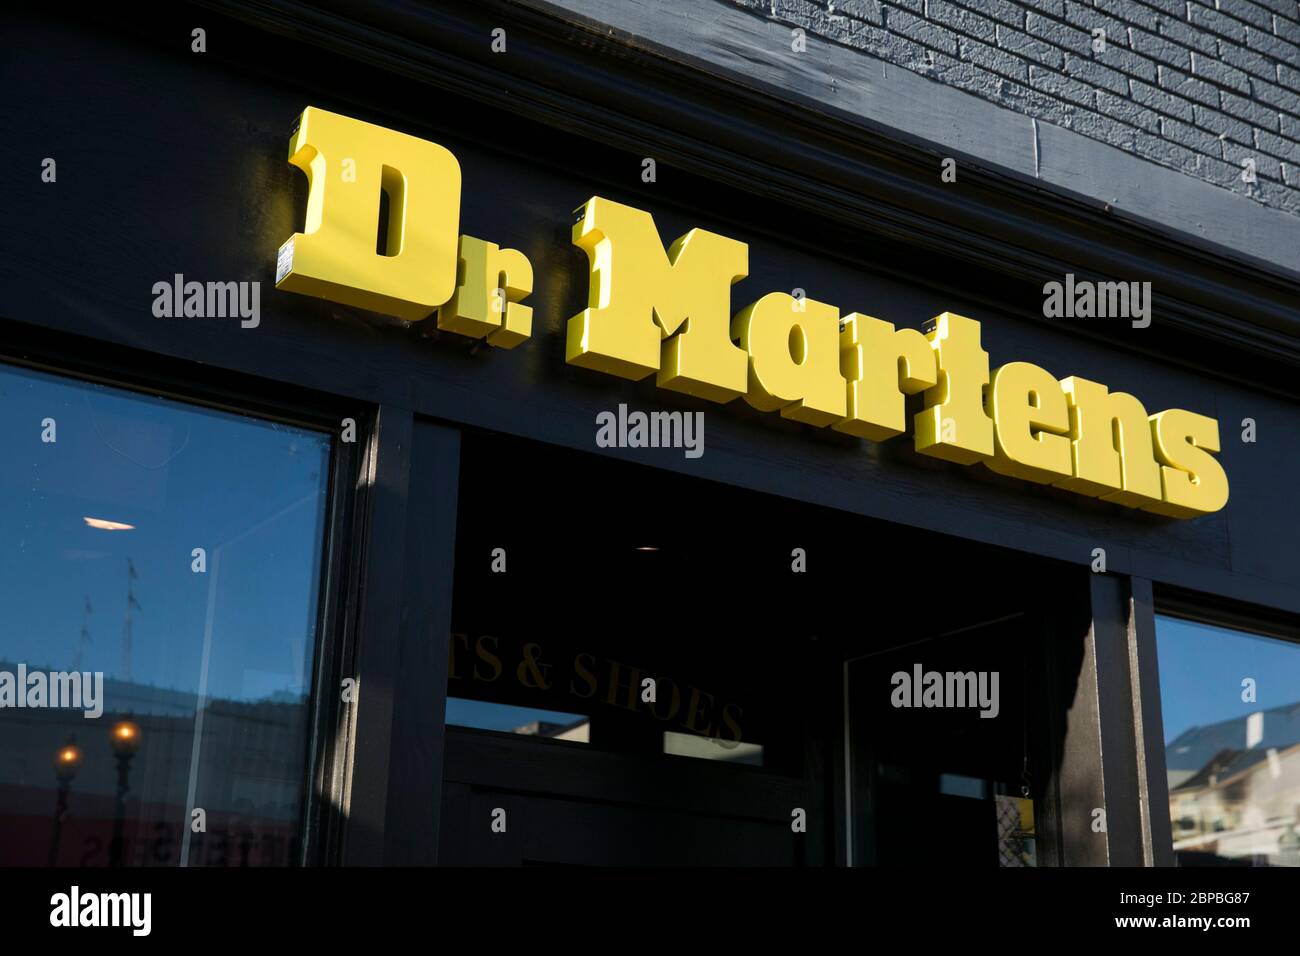 A logo sign outside of a Dr. Martens retail store location in Washington, D.C., on May 9, 2020. Stock Photo